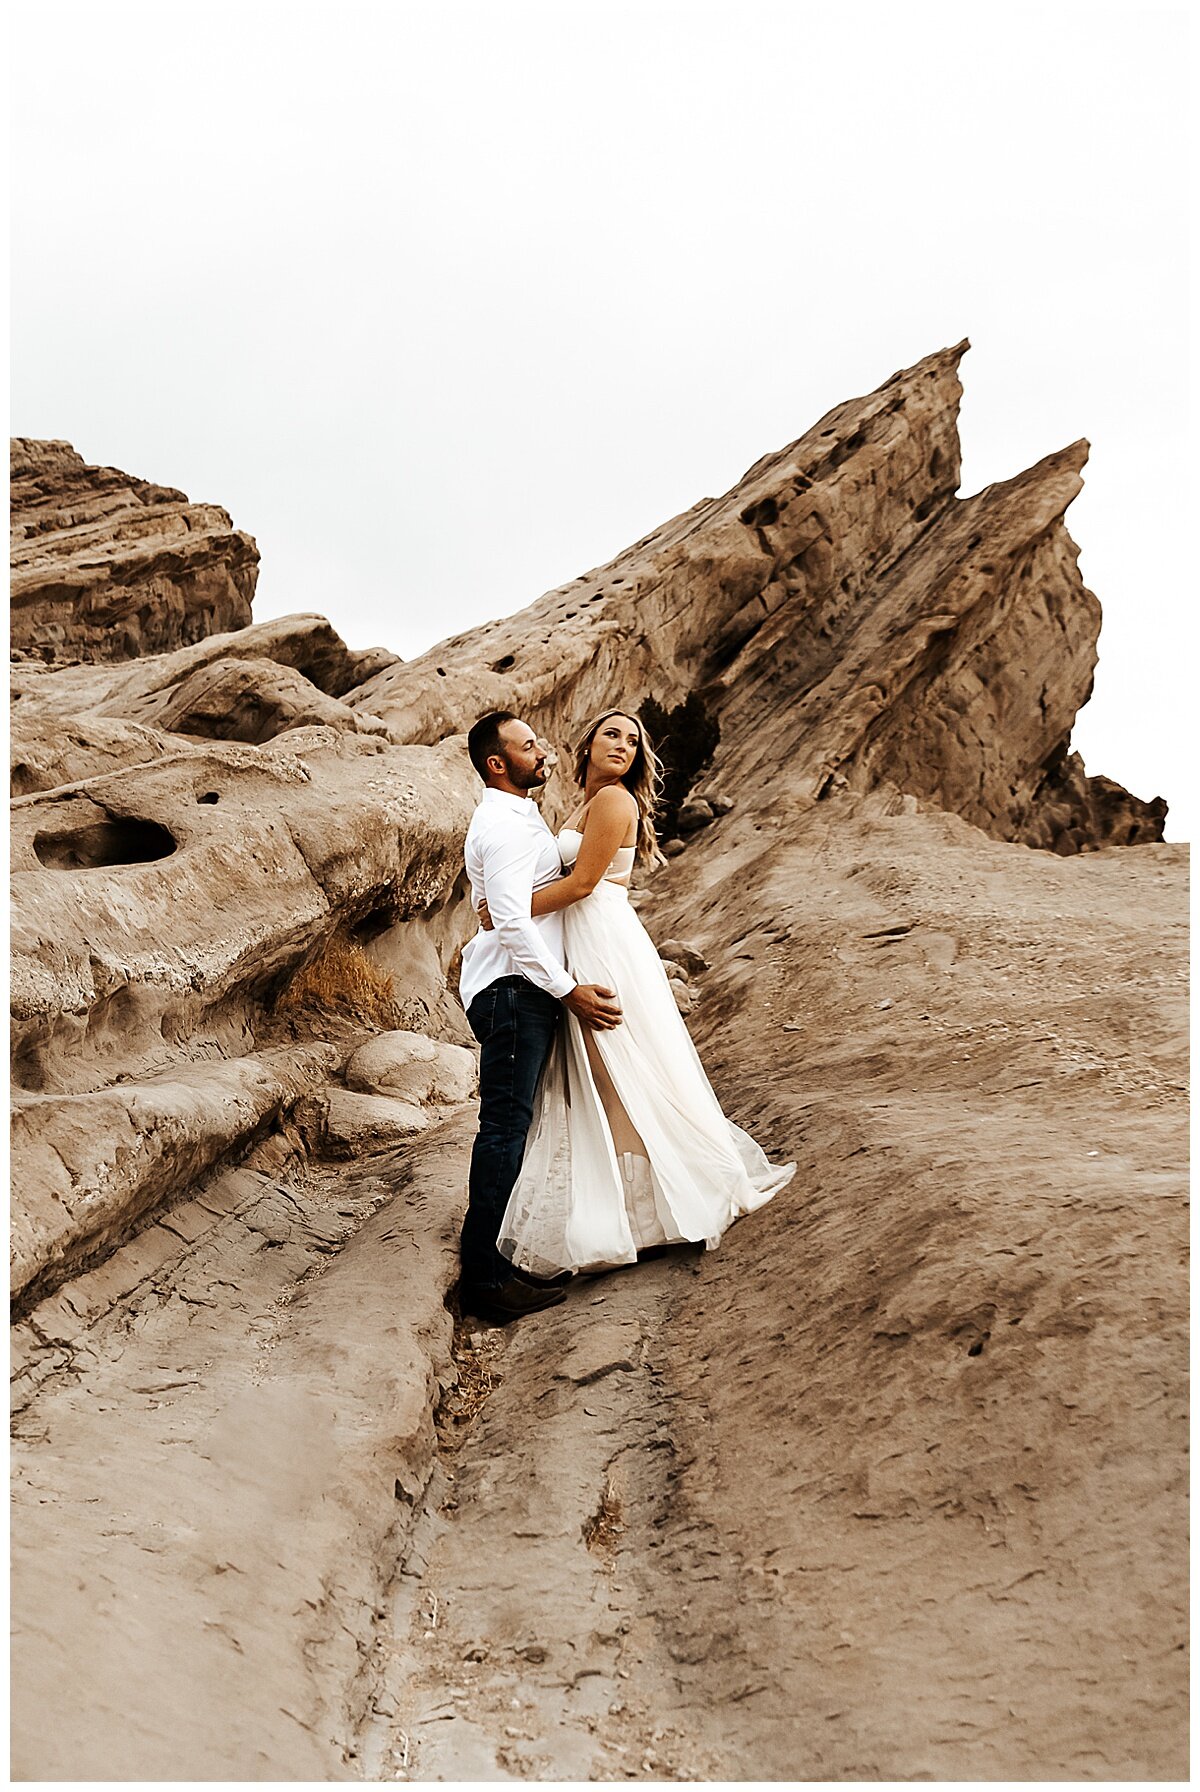 Kylie&andrewengagment_0007.jpg